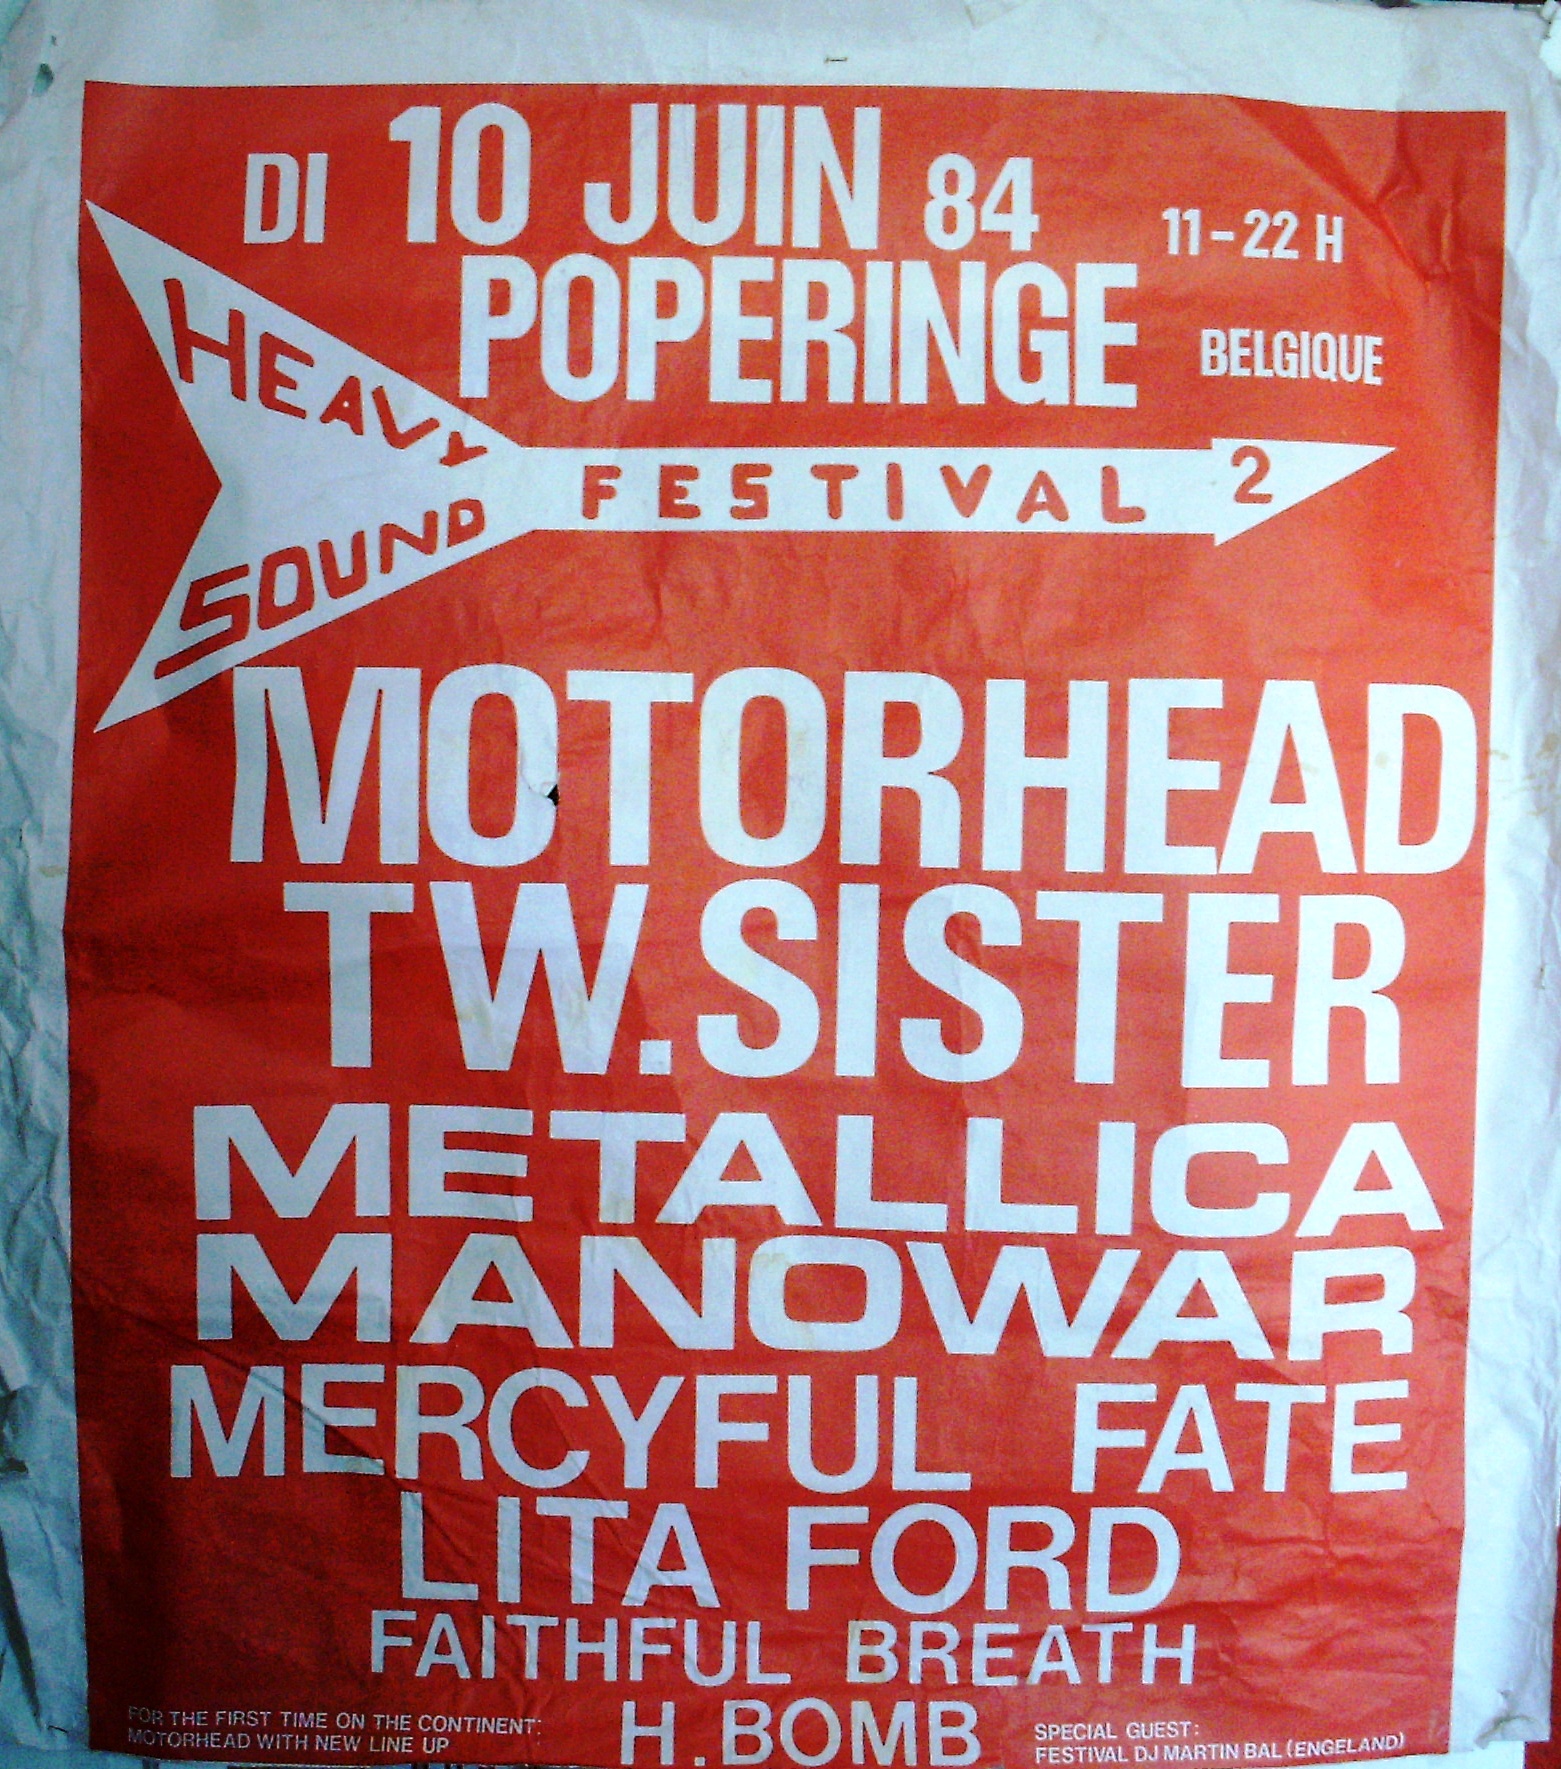 [Flyers] In remembrance of the Old Time - Page 5 Festival_Heavy_Sound_Festival_84_Poperinge